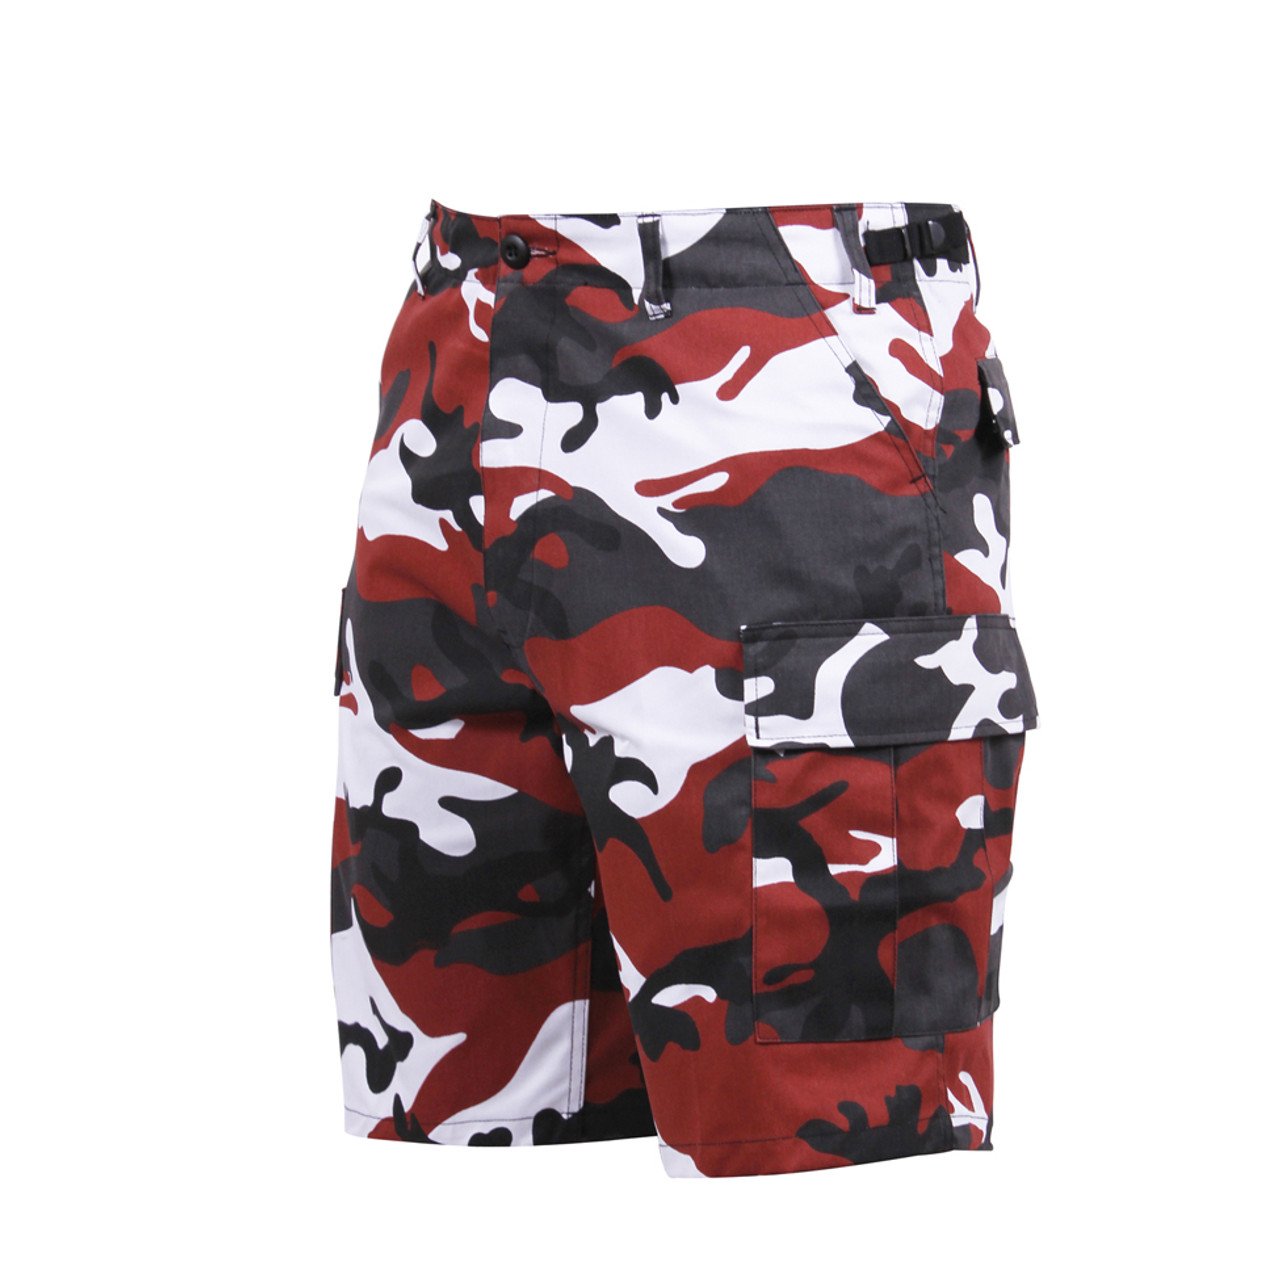 Shop Rothco Military Red Camo BDU Shorts - Fatigues Army Navy